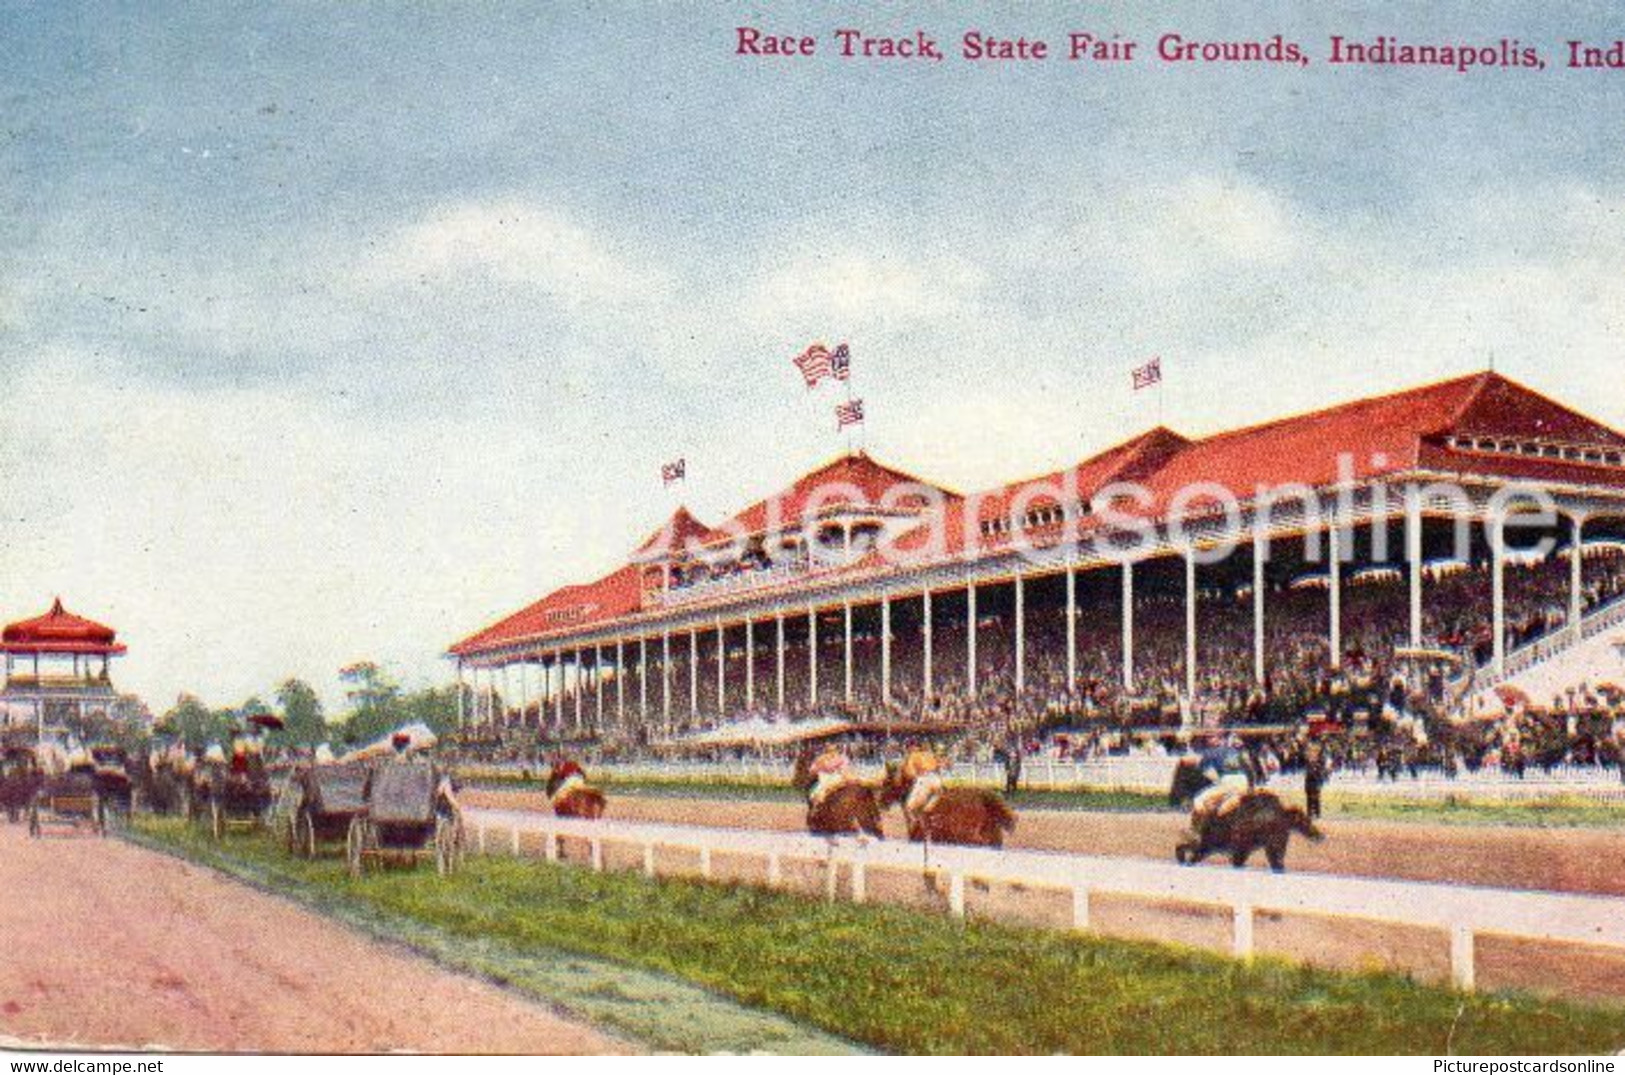 RACE TRACK STATE FAIR GROUNDS INDIANAPOLIS OLD COLOUR POSTCARD INDIANA USA AMERICA - Indianapolis